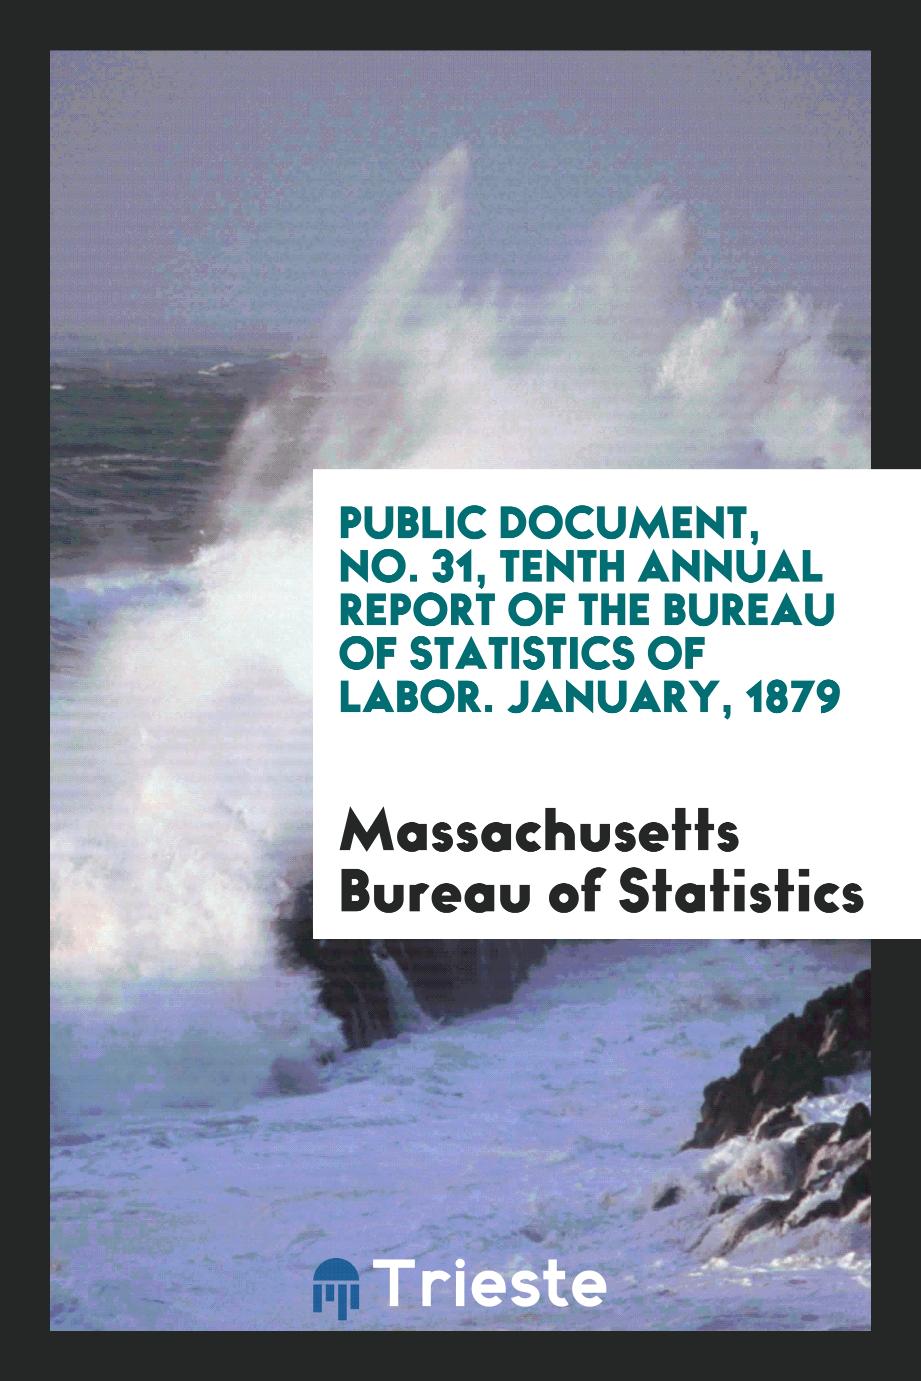 Public Document, No. 31, Tenth Annual Report of the Bureau of Statistics of Labor. January, 1879